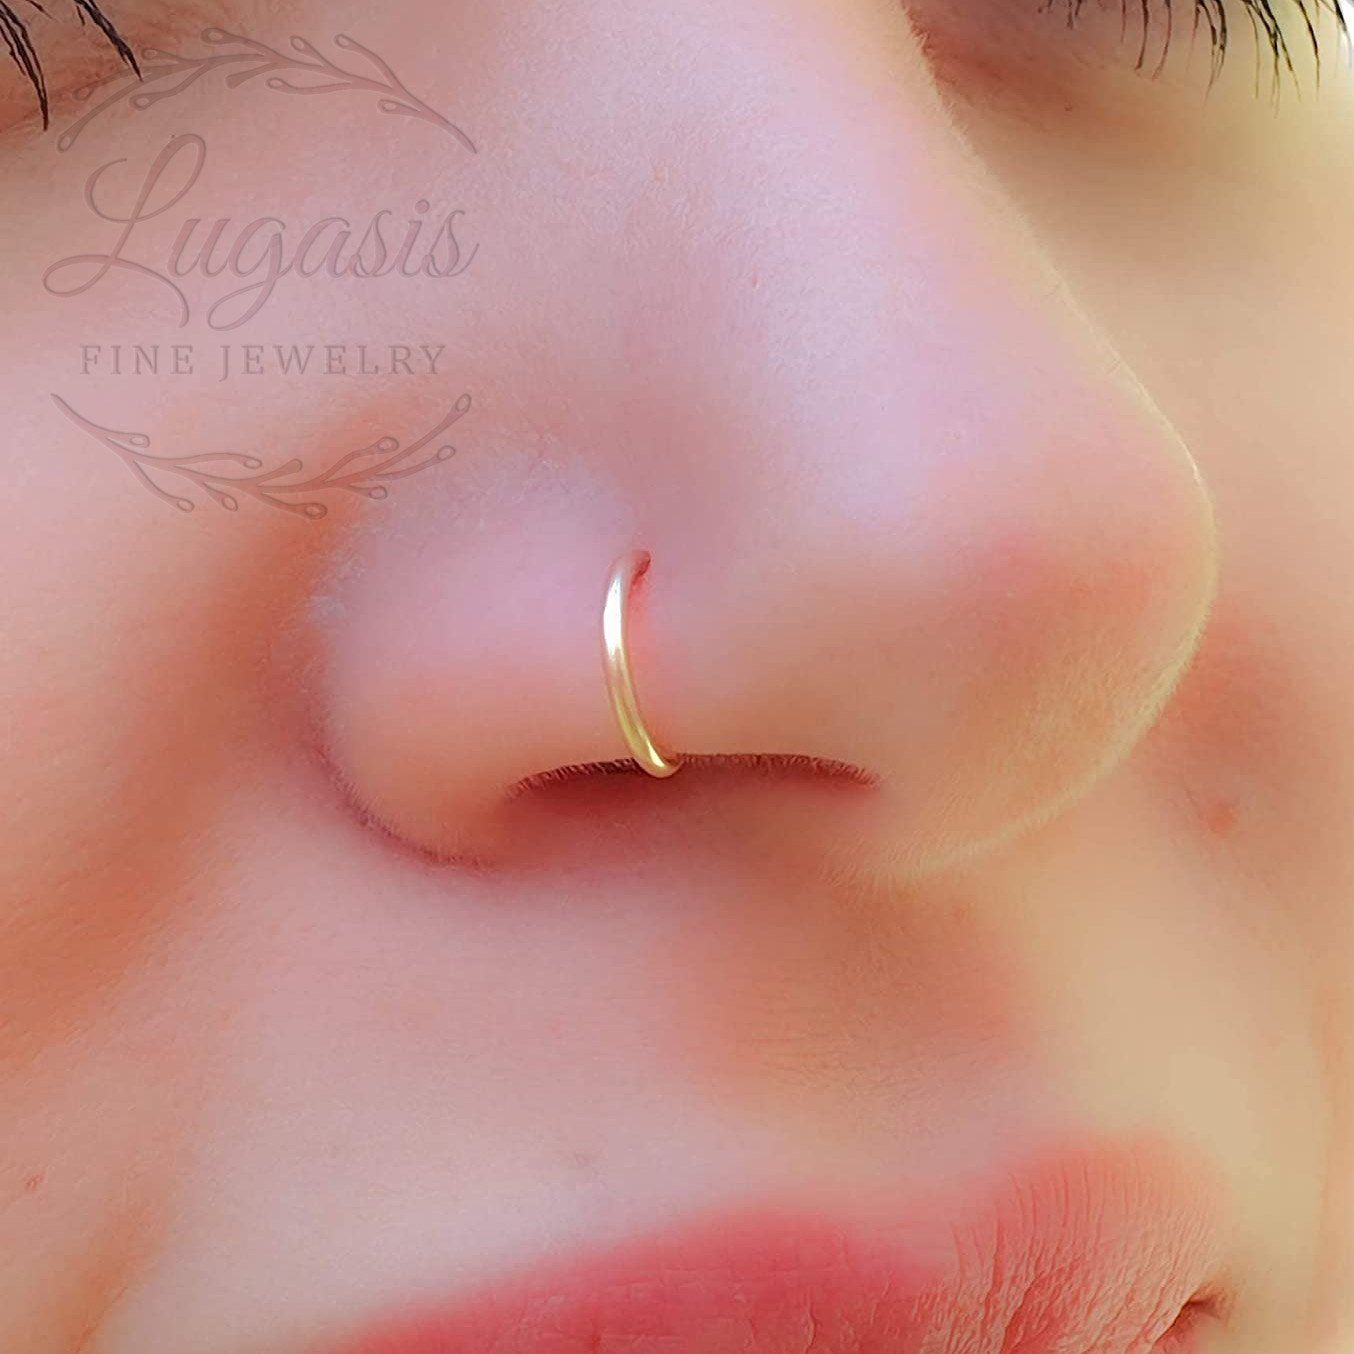 Nose Ring Small Nose Hoop 9ct Gold Filled Thin Nose Twirly Rope Nose Hoop  Helix | eBay